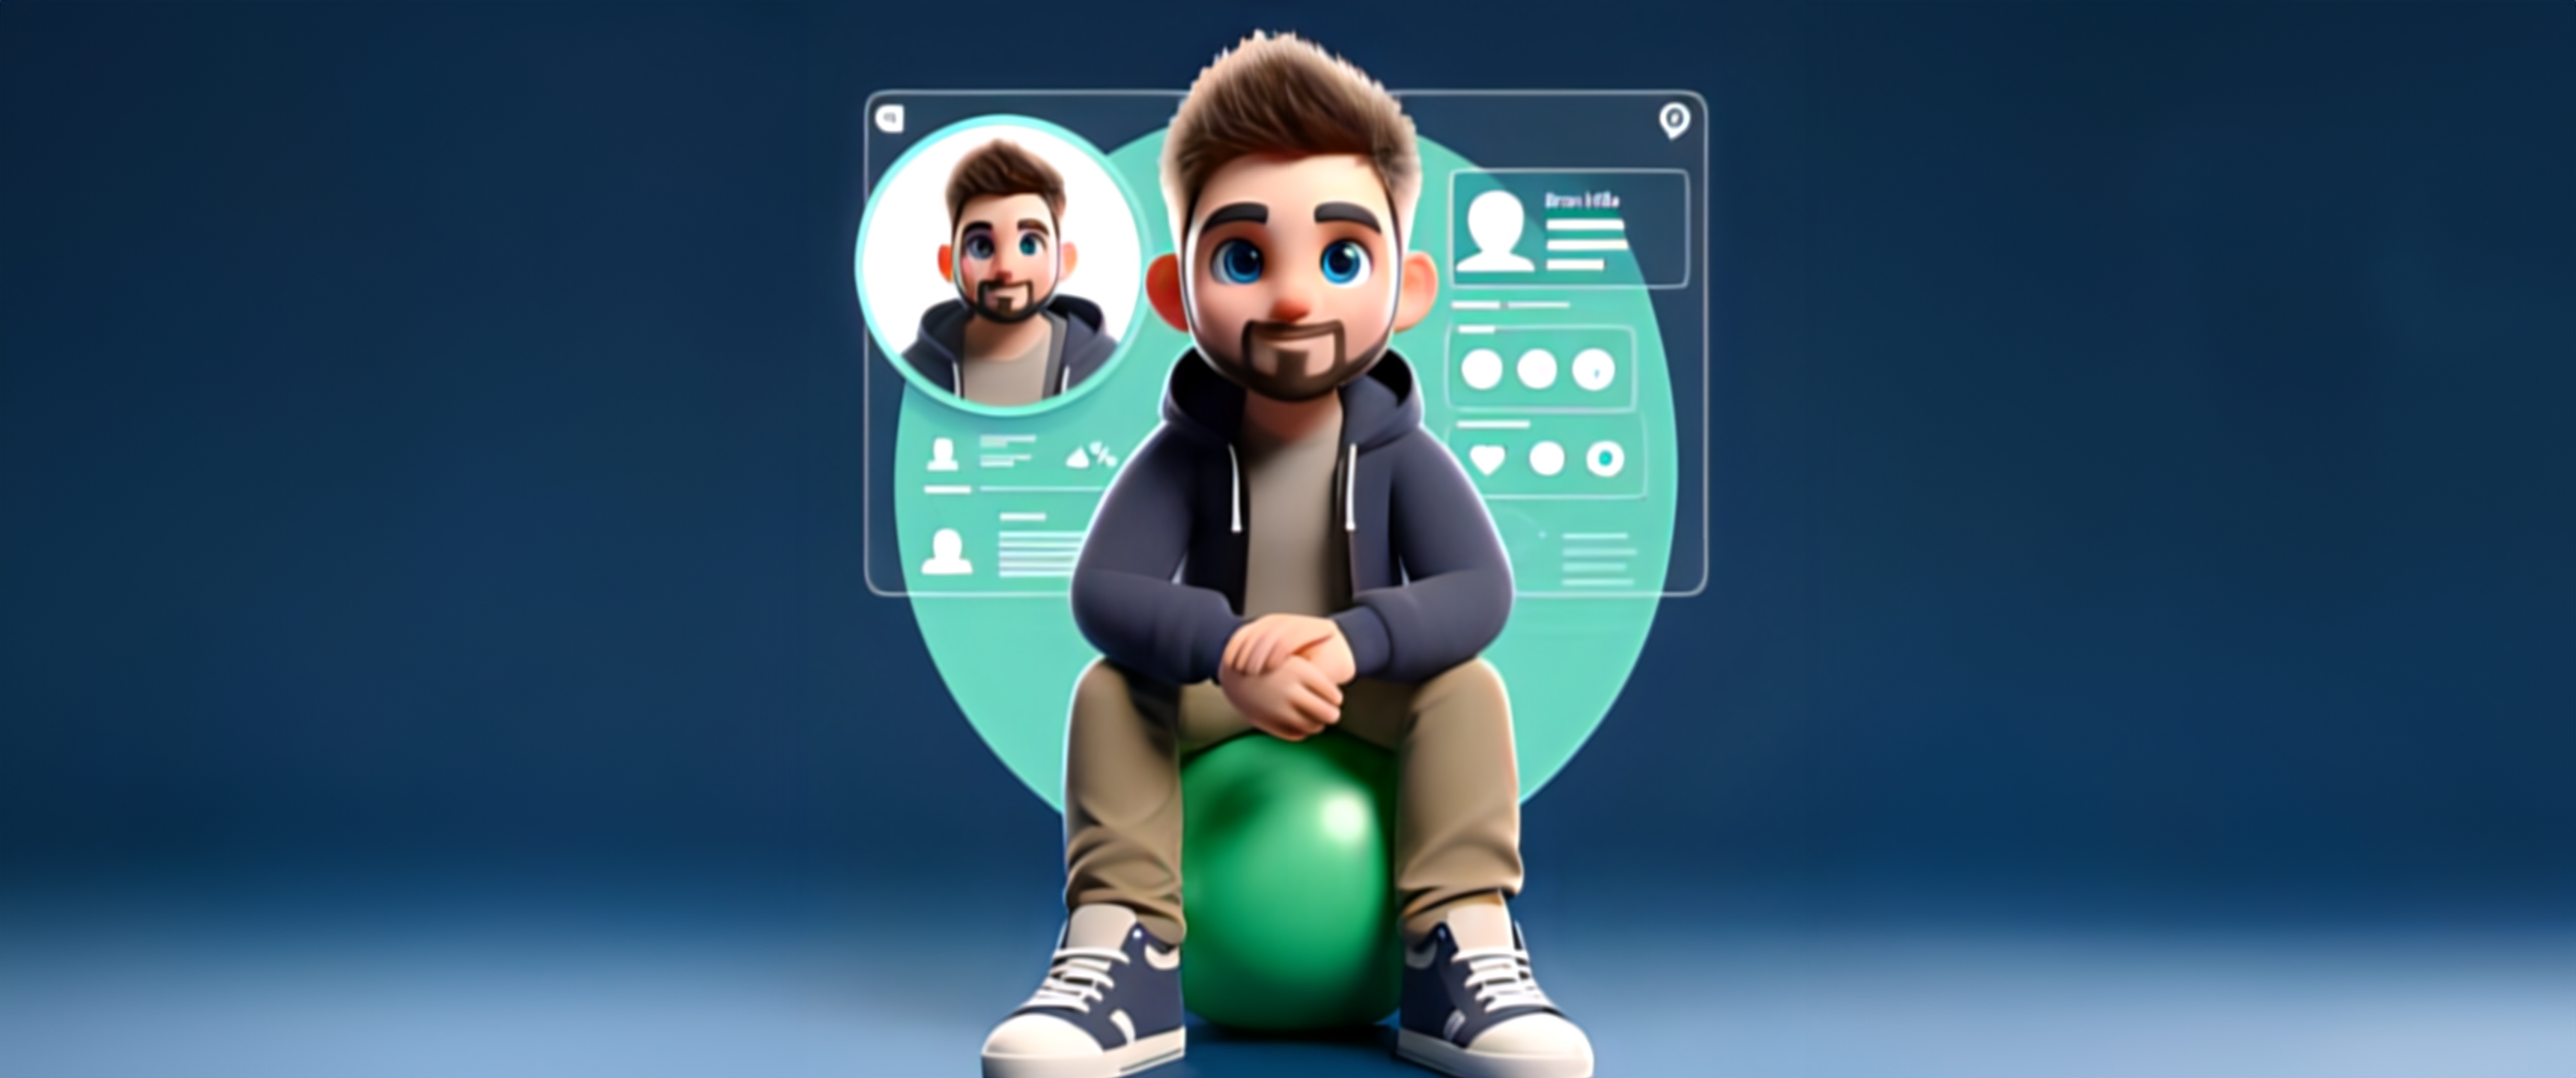 BranHills blog image of a 3d avatar sitting on a ball in front of a floating user interface